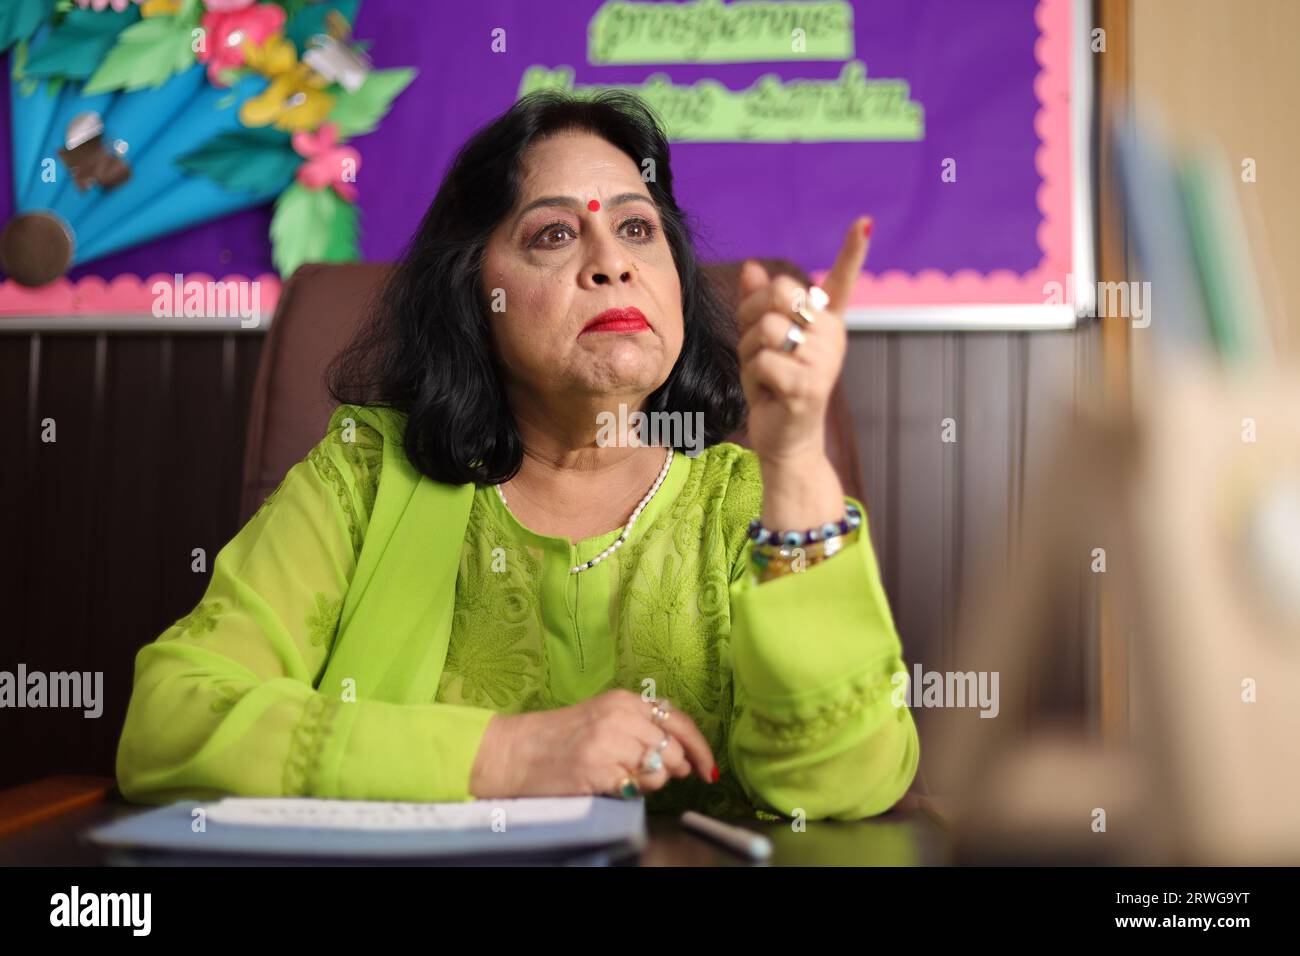 Principal of school sitting in her office with aggression, fuming with anger, furious expression. Stock Photo